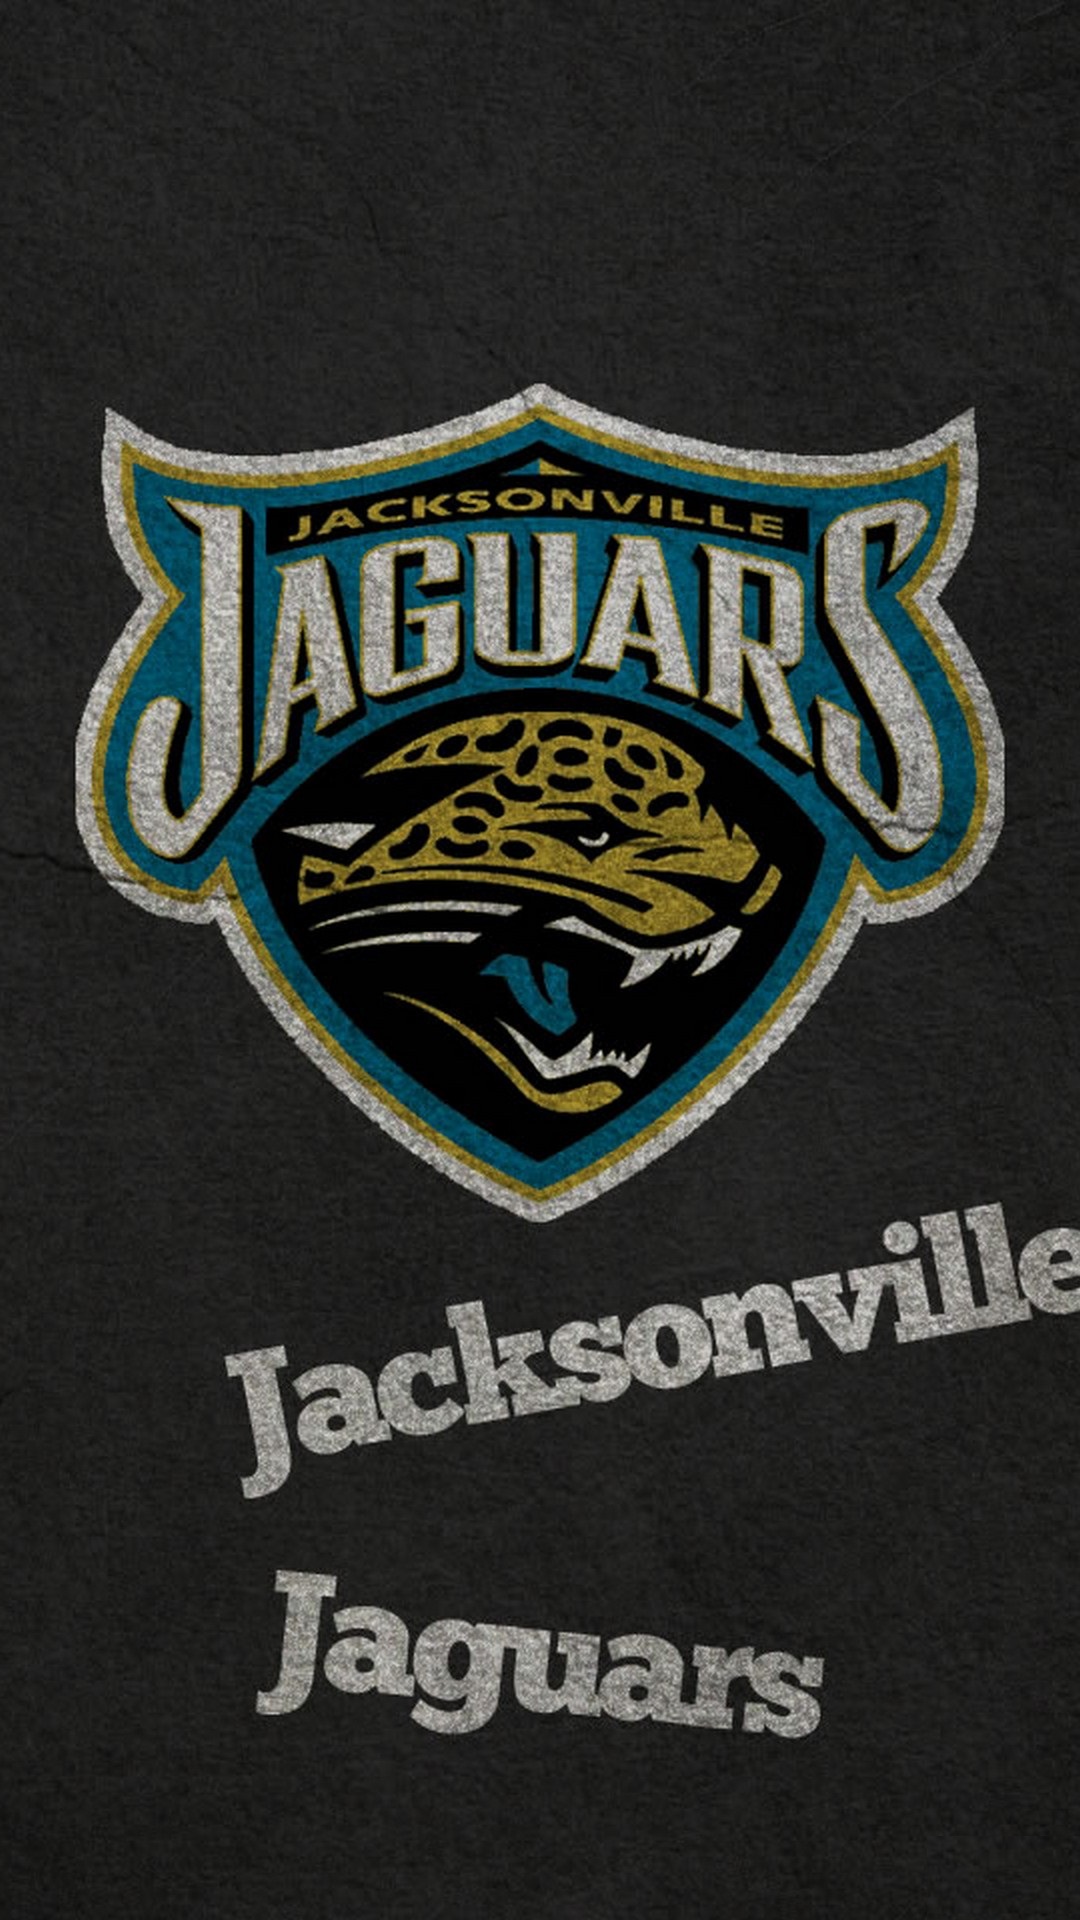 Jacksonville Jaguars iPhone Wallpaper Lock Screen with high-resolution 1080x1920 pixel. Download and set as wallpaper for Desktop Computer, Apple iPhone X, XS Max, XR, 8, 7, 6, SE, iPad, Android